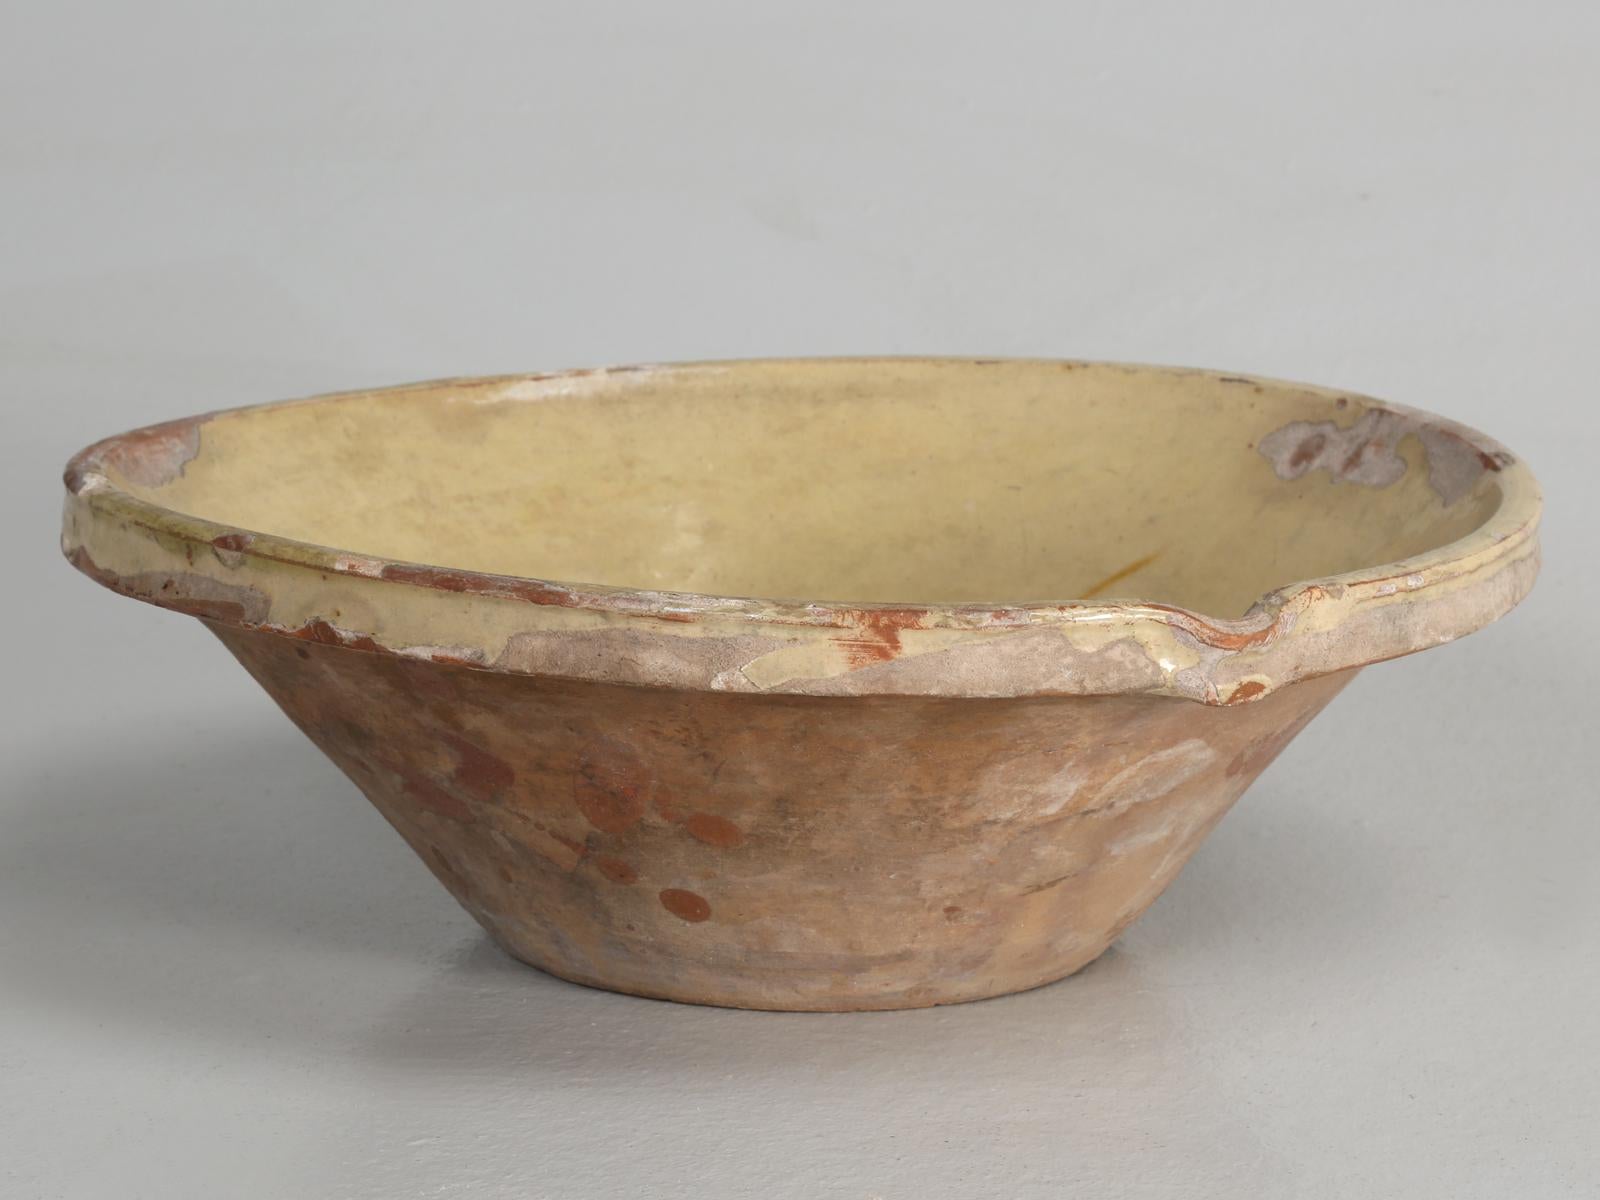 A very antique English pancheon bowl, made from earthenware (from red of buff clay) farmhouse dairy bowl, typically used to allow the milk to separate from the cream and also used in bread making and proving. I have to assume that the British, would